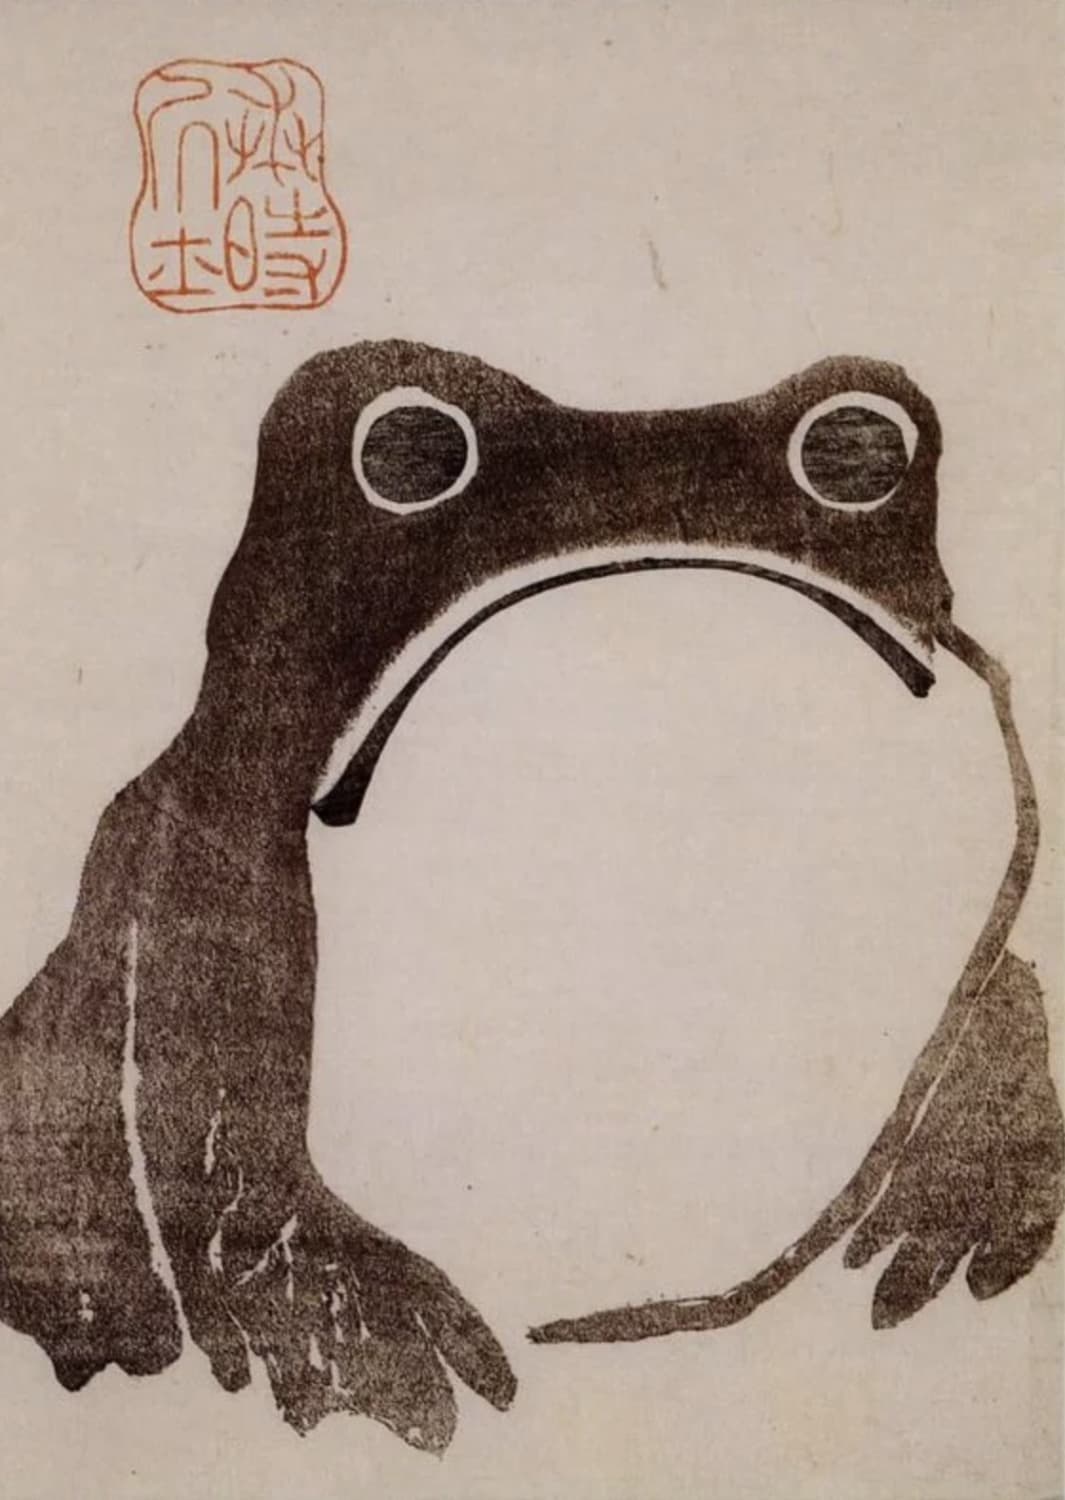 Frog, by the Japanese artist Matsumoto Hoji. 1814 CE